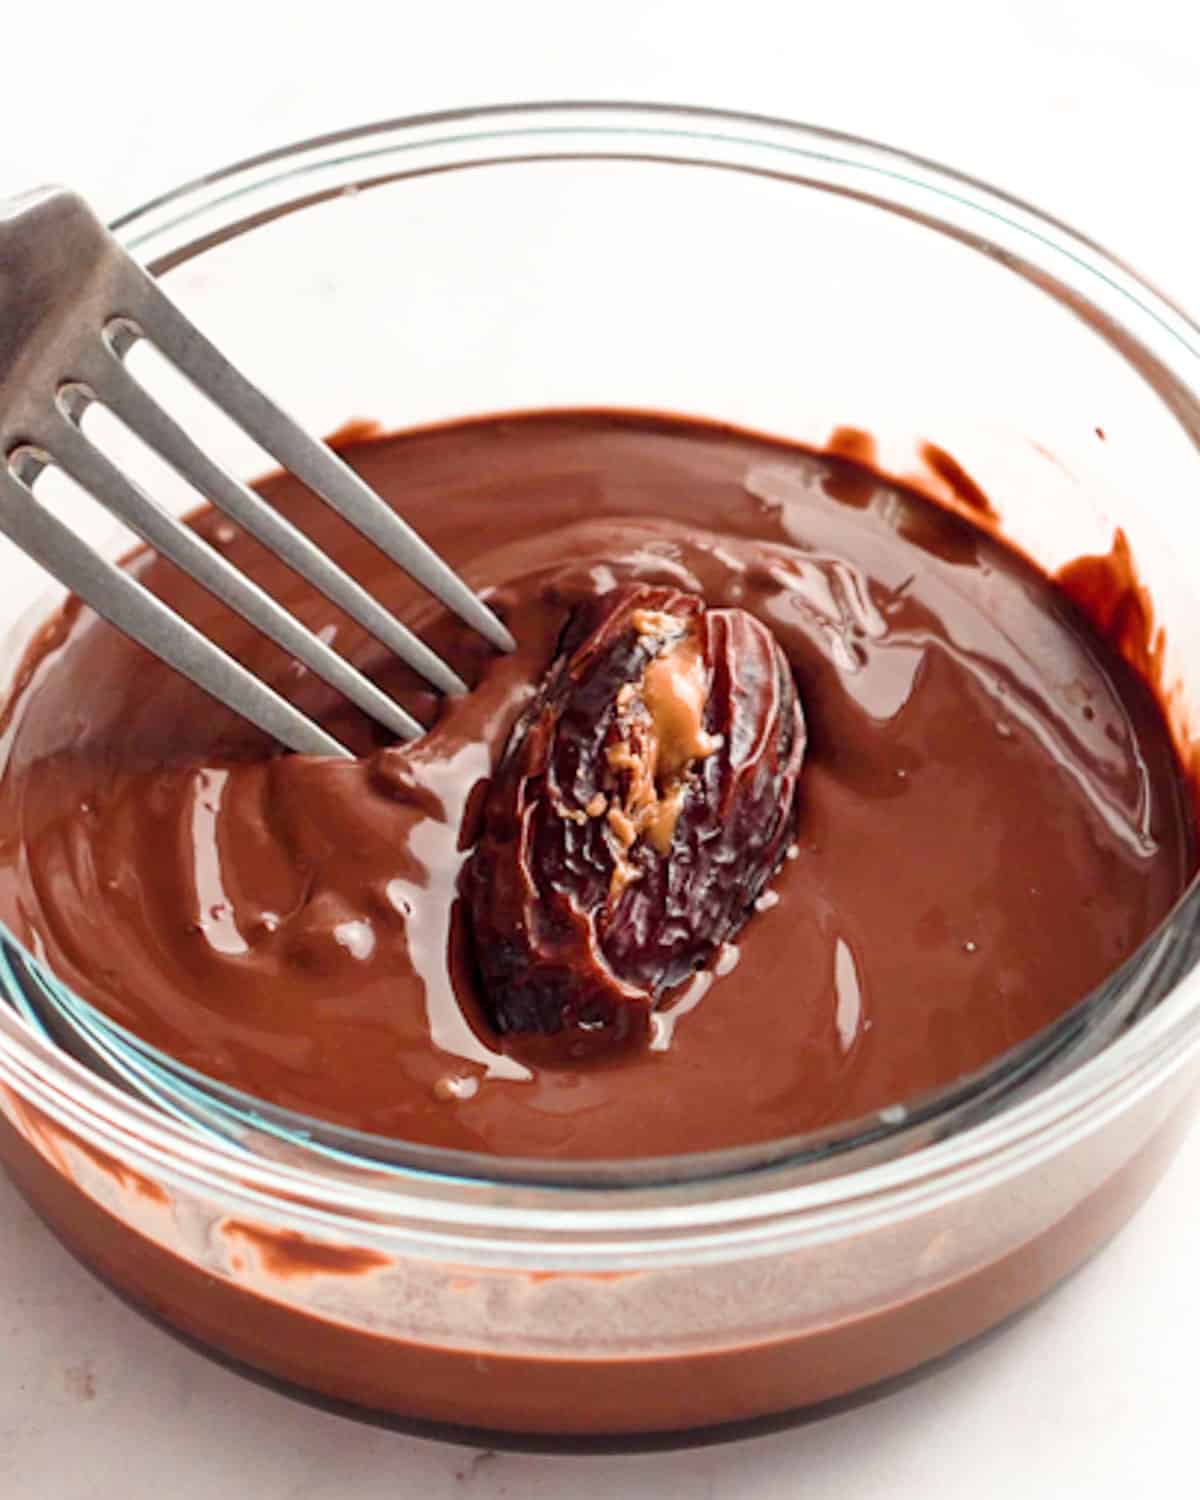 stuffed dates in a bowl of melted chocolate.